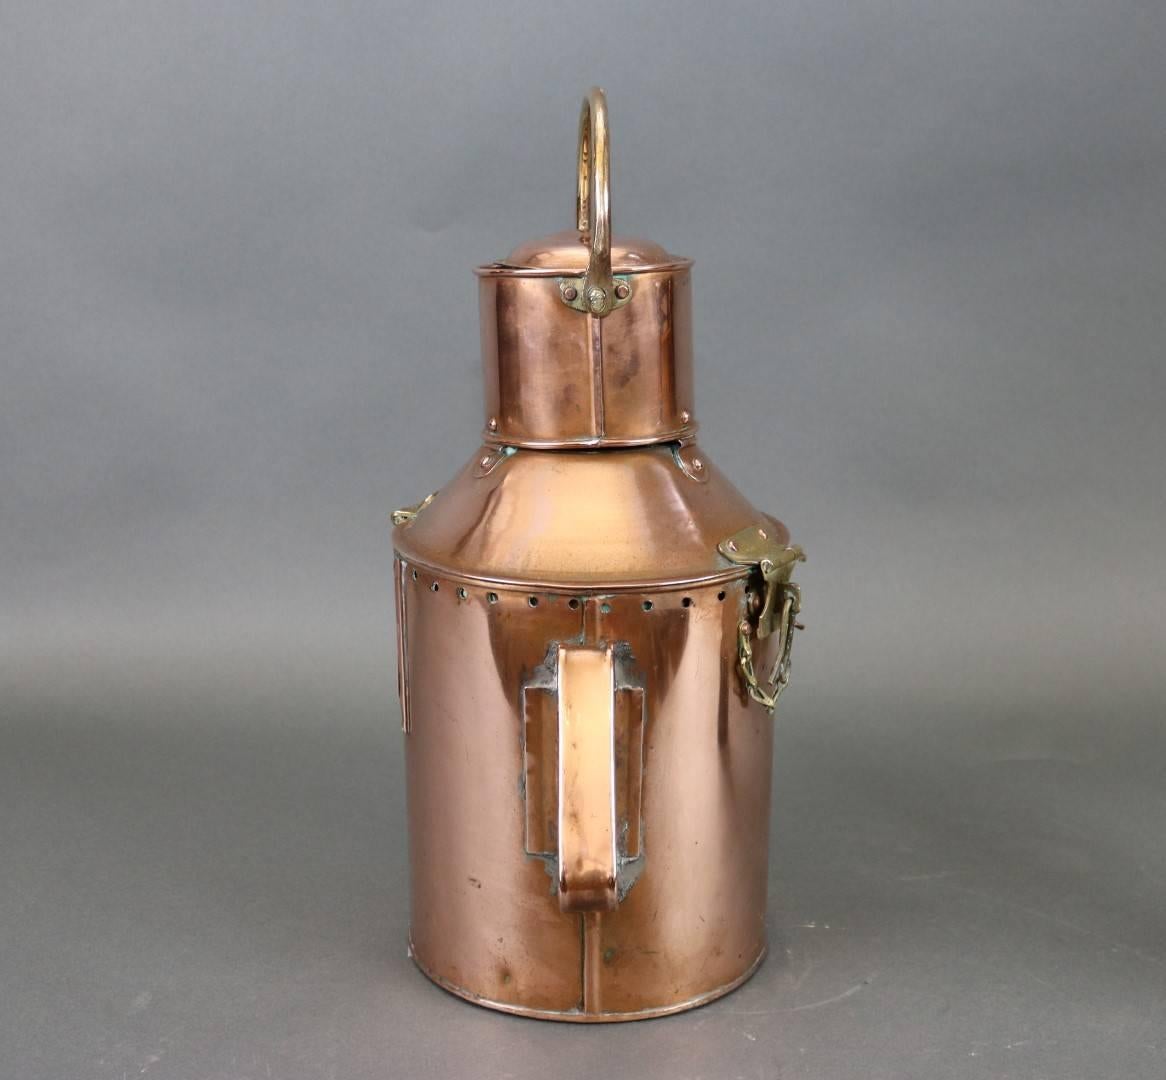 This is a hand held copper Signal lantern with Fresnel lens and a thumb operated shutter to send messages. Hinged top with brass clasp. Also contains original burner. Dimensions: 9" L x 10" W x 14" H (w/o handle).